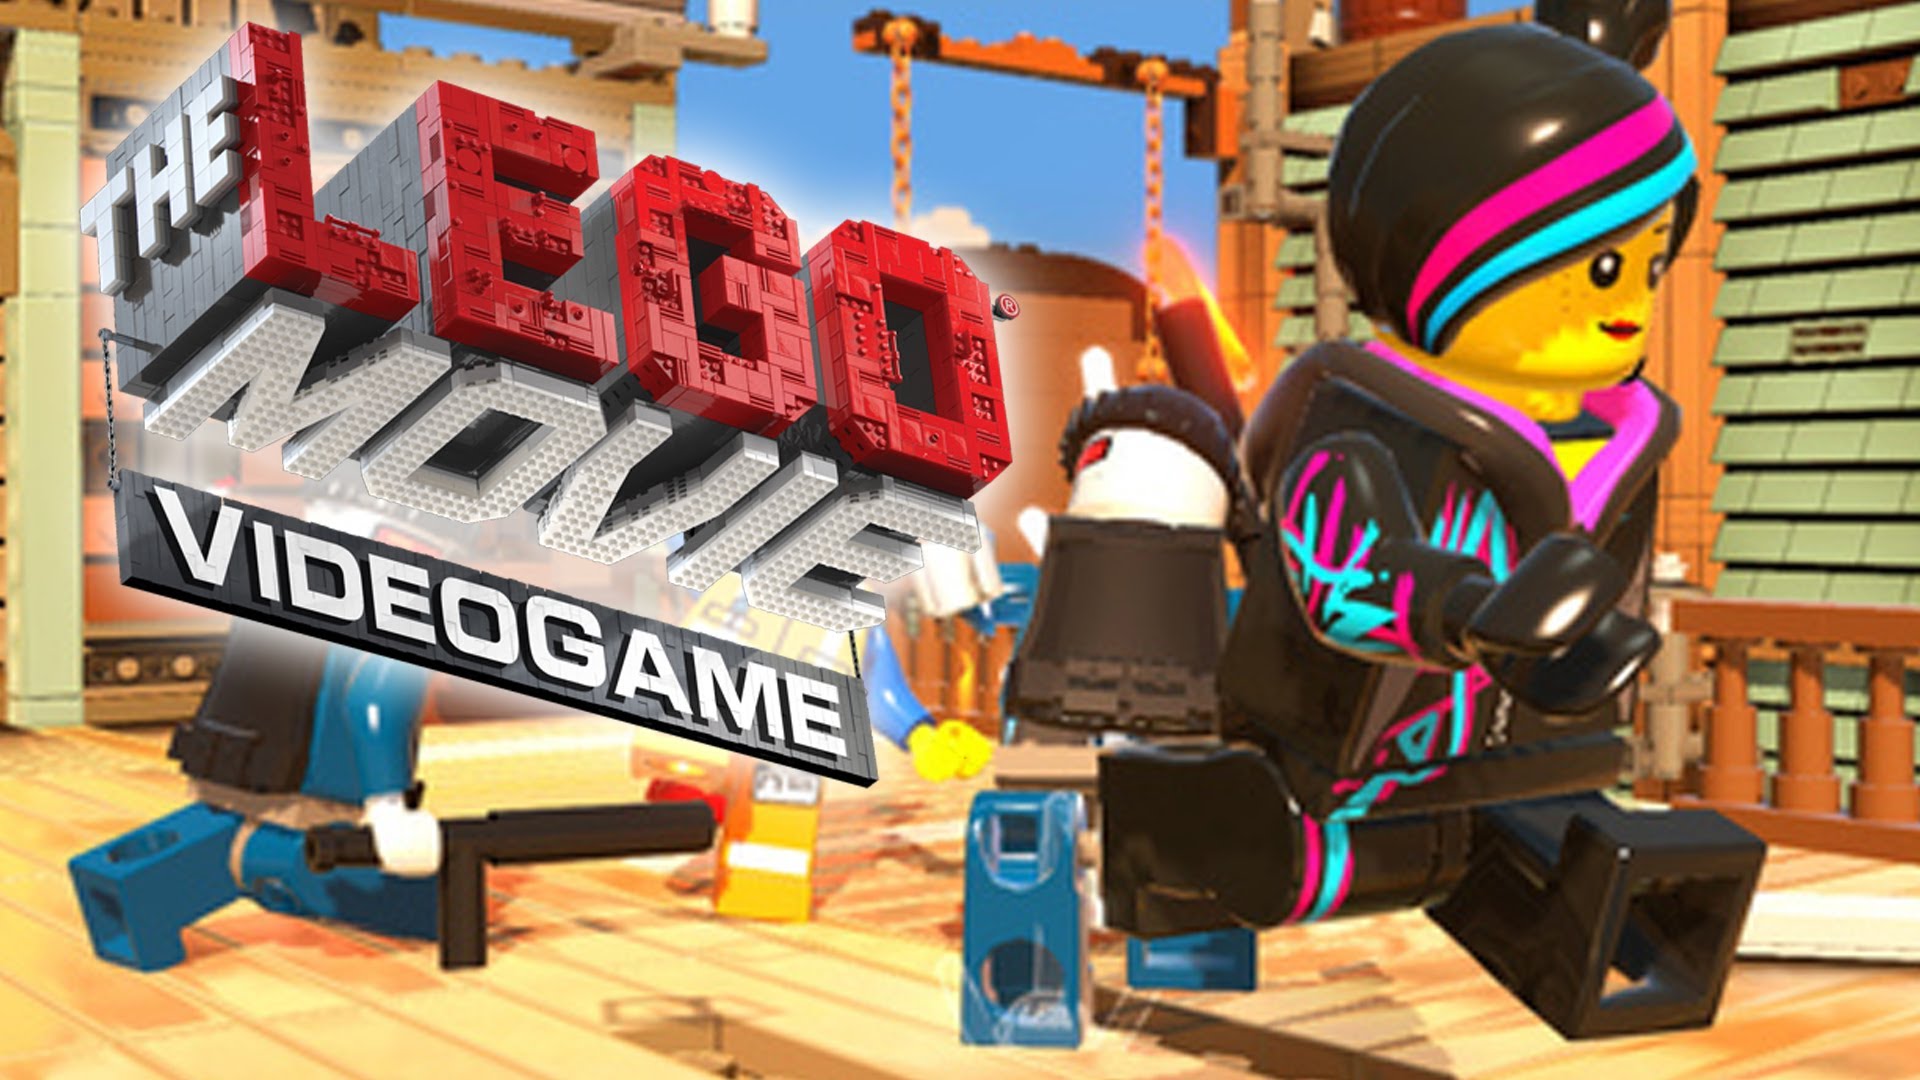 The LEGO Movie Videogame Backgrounds, Compatible - PC, Mobile, Gadgets| 1920x1080 px